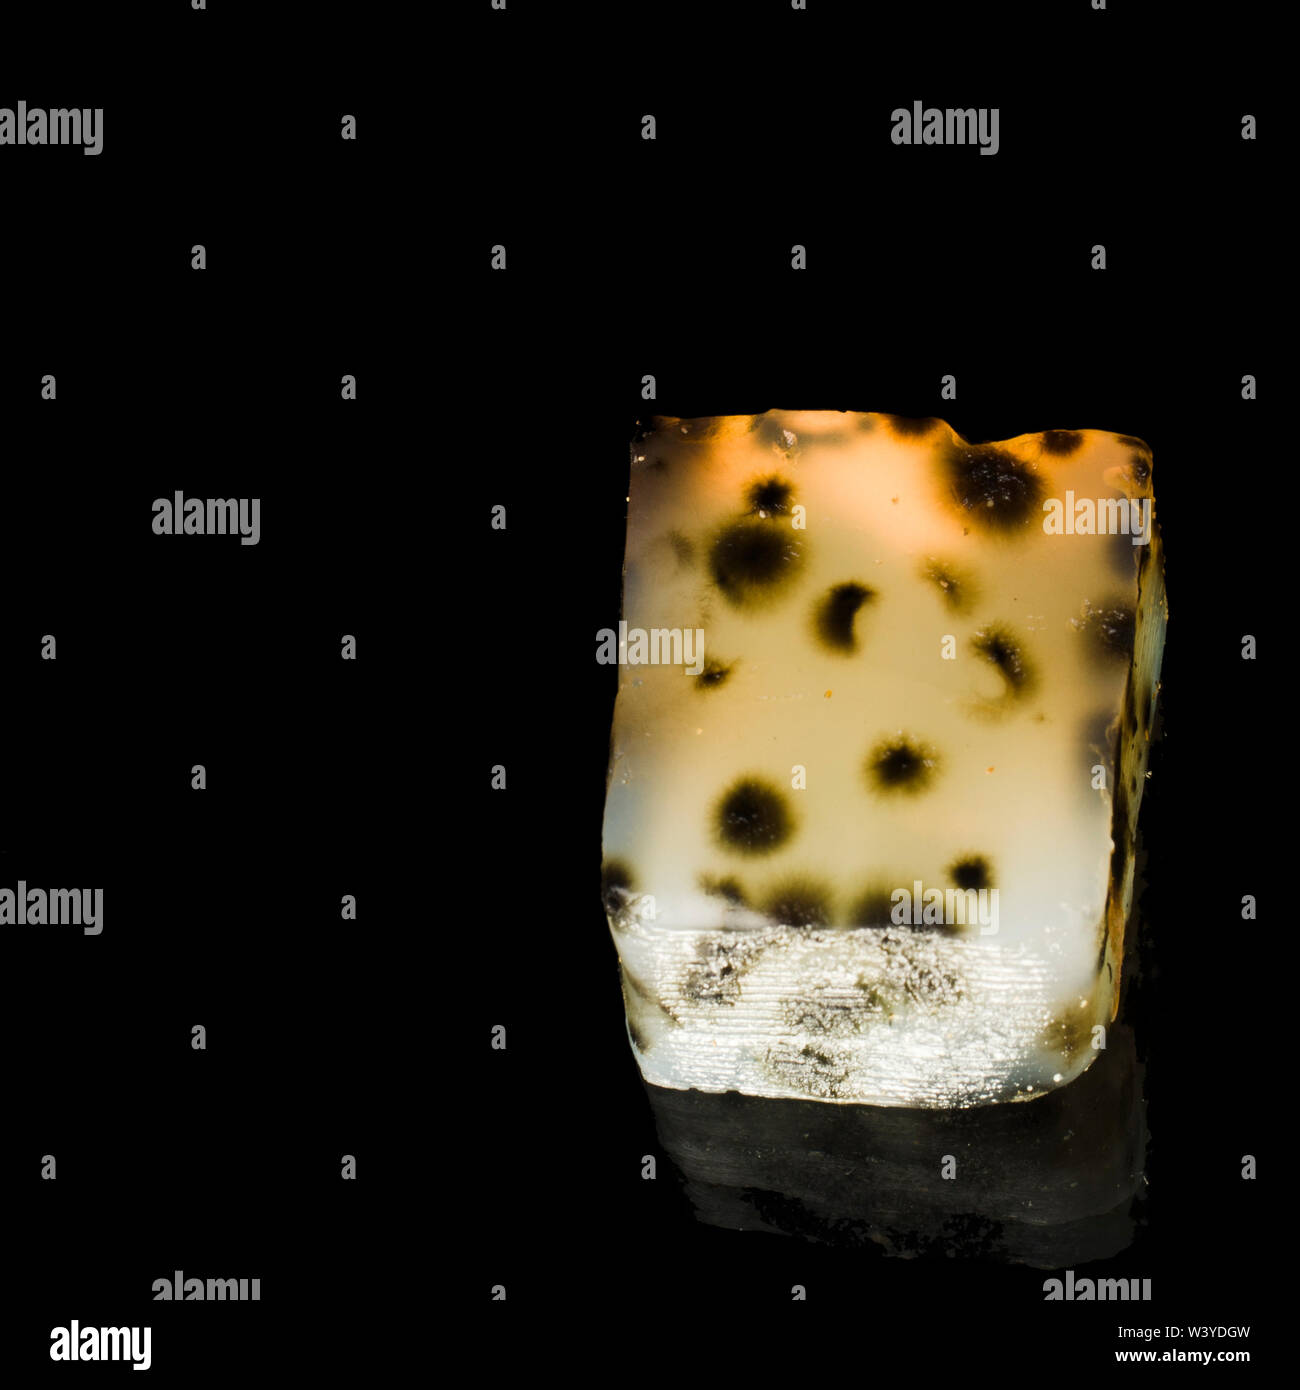 Agar Jelly Square with Fungus on Black Background Stock Photo